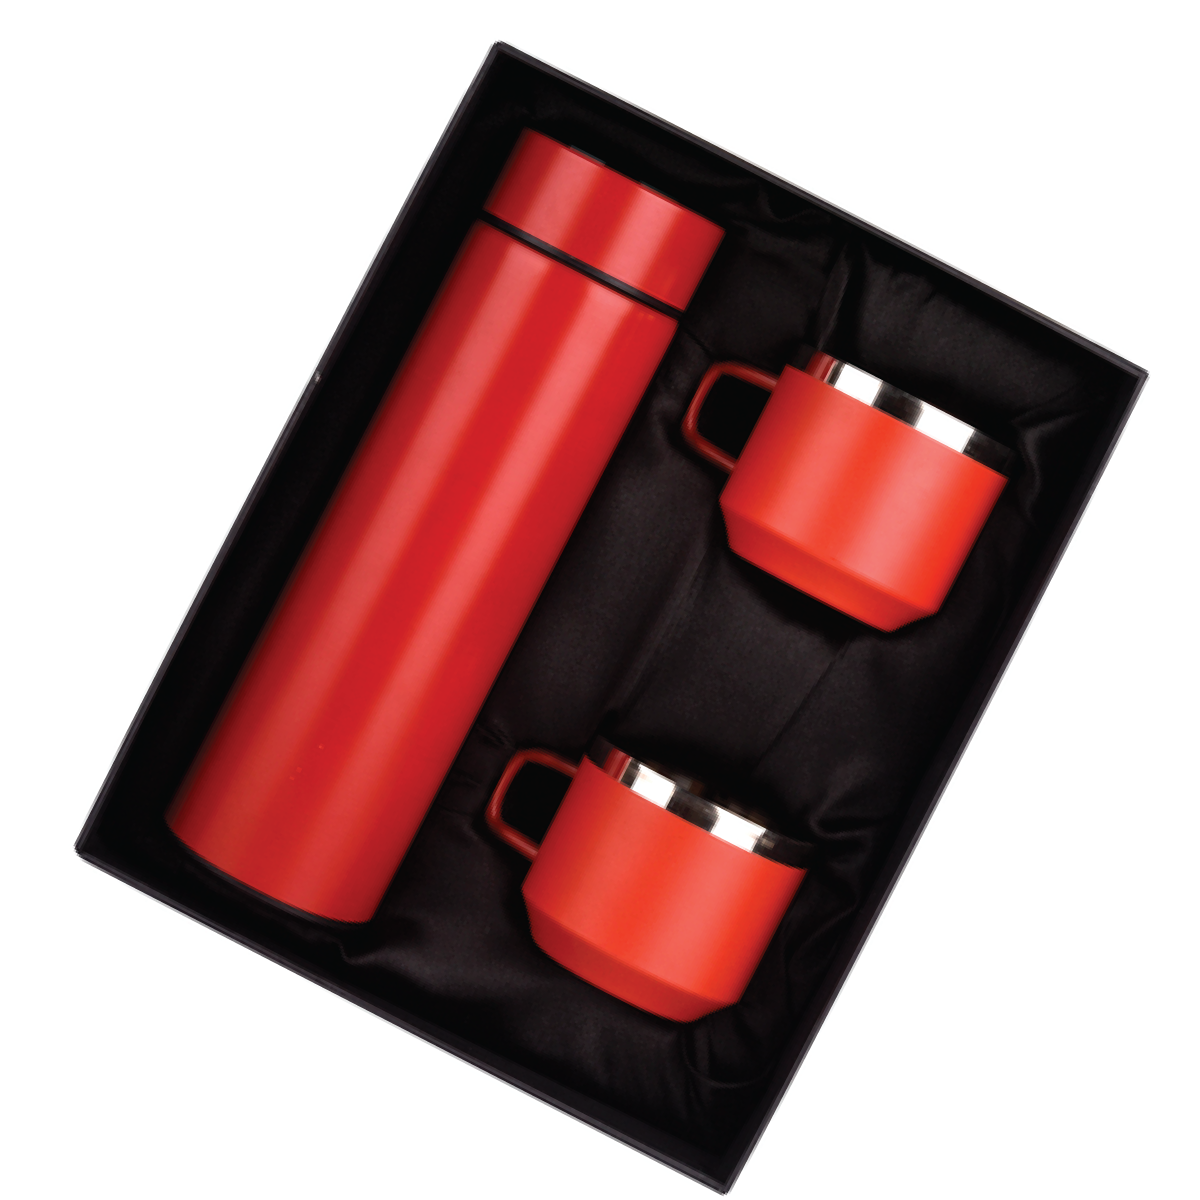 Red Temperature Bottle With 2 Steel Cups Gift Set - For Employee Joining Kit, Corporate, Client or Dealer Gifting HK37333